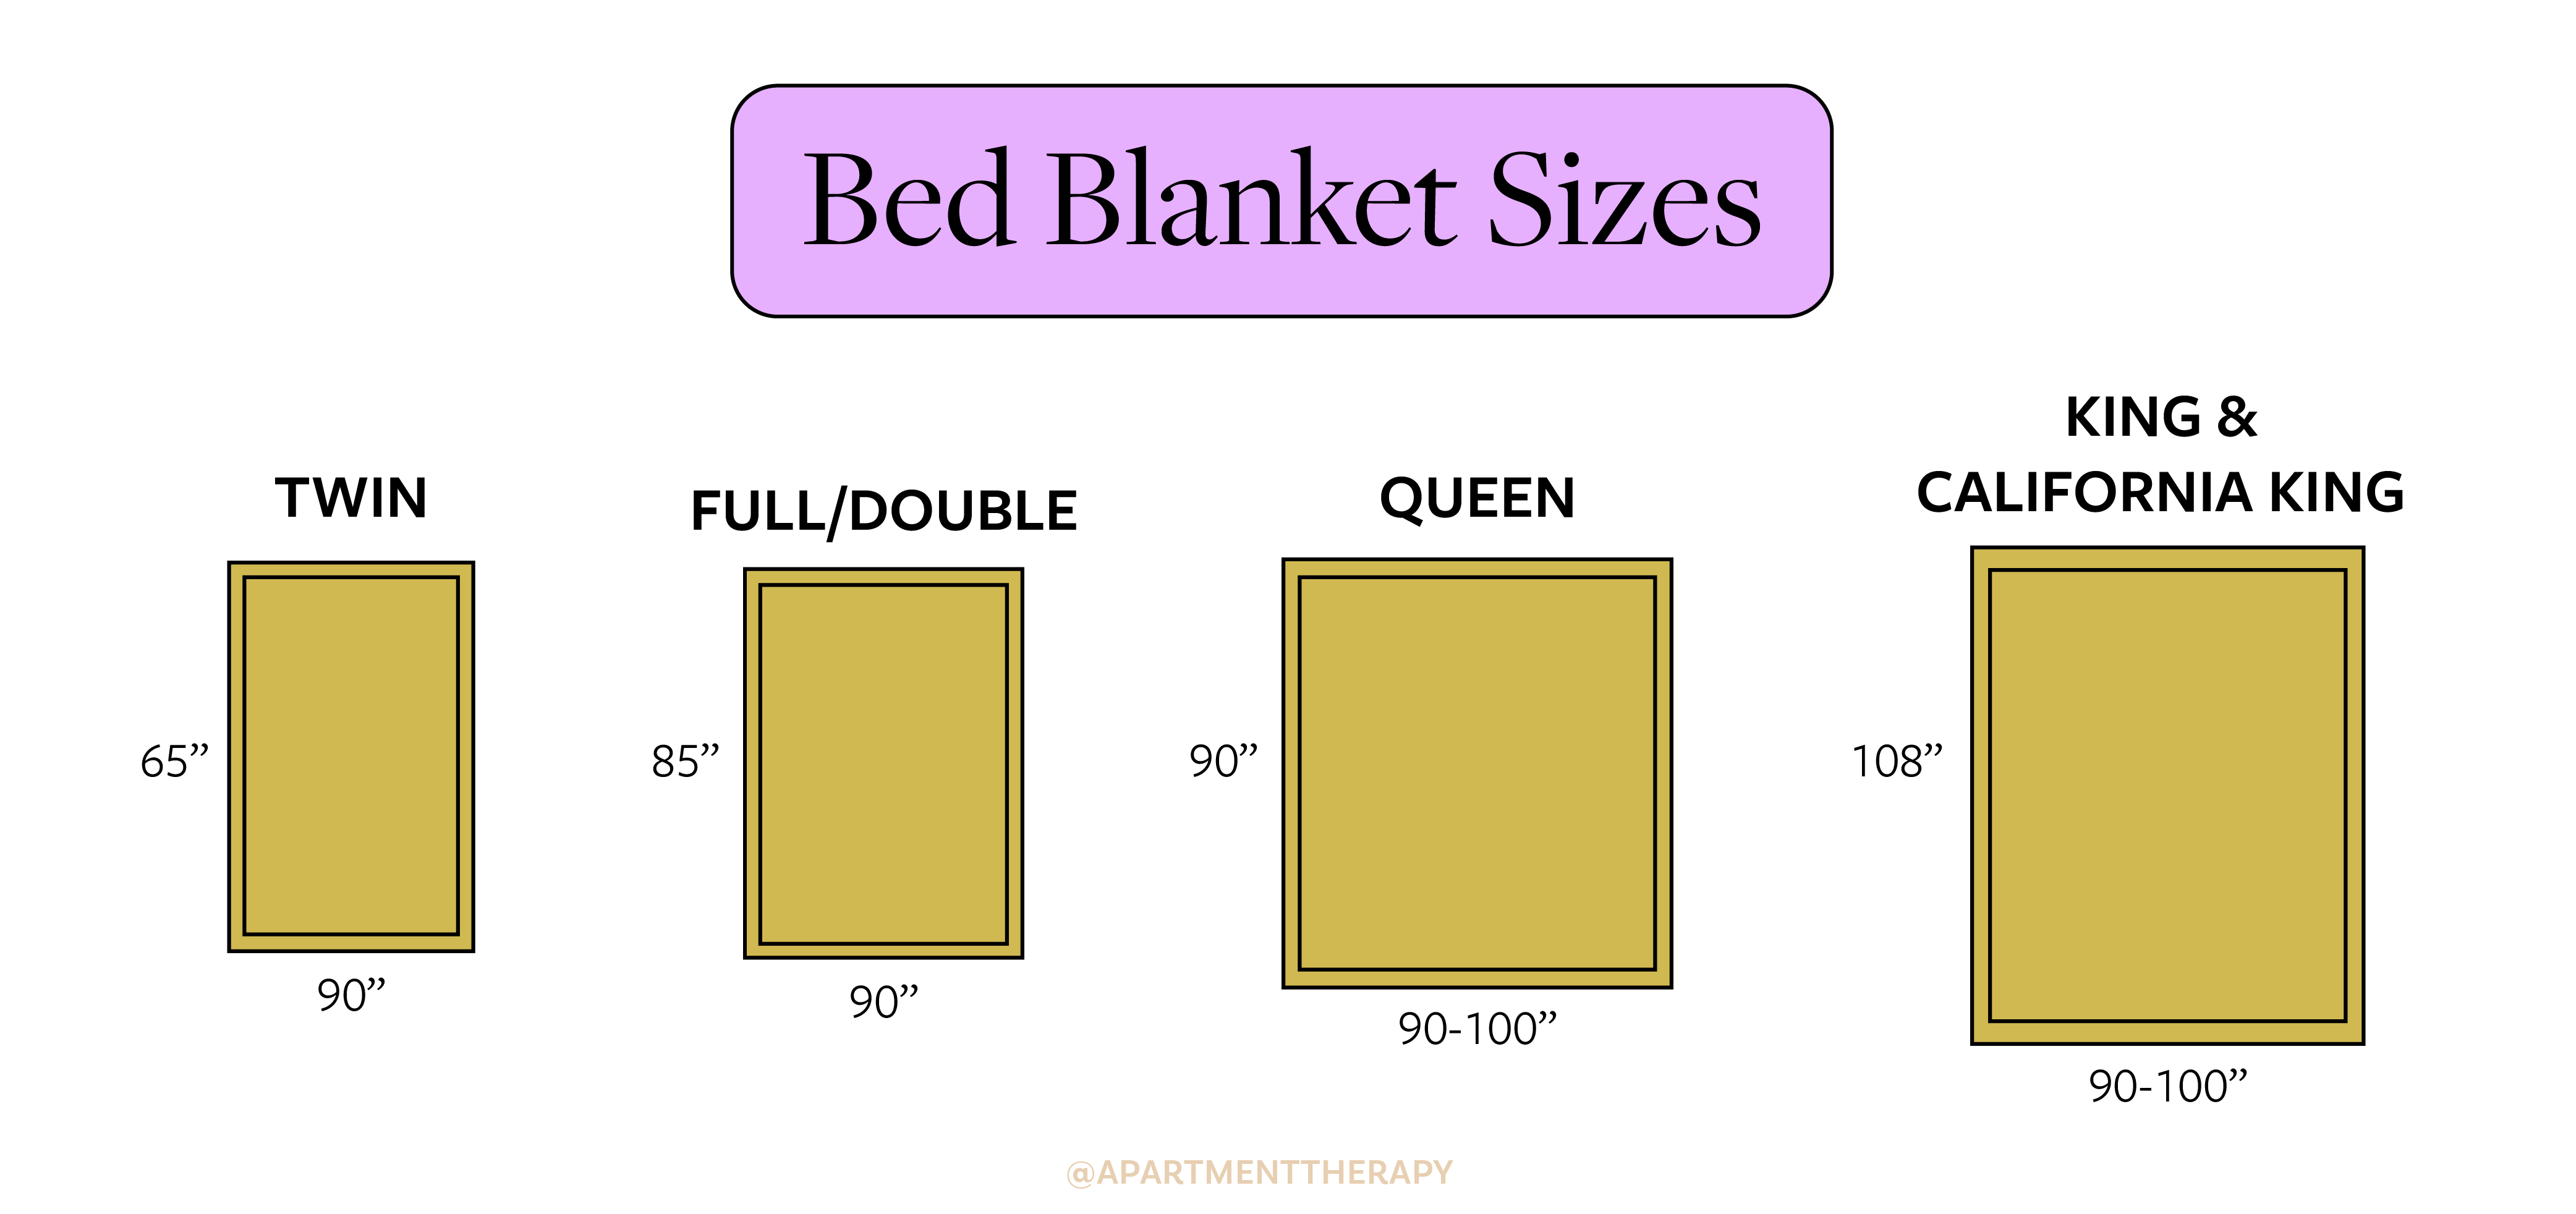 Blanket Sizes Chart  12 Common Sizes from Baby to King